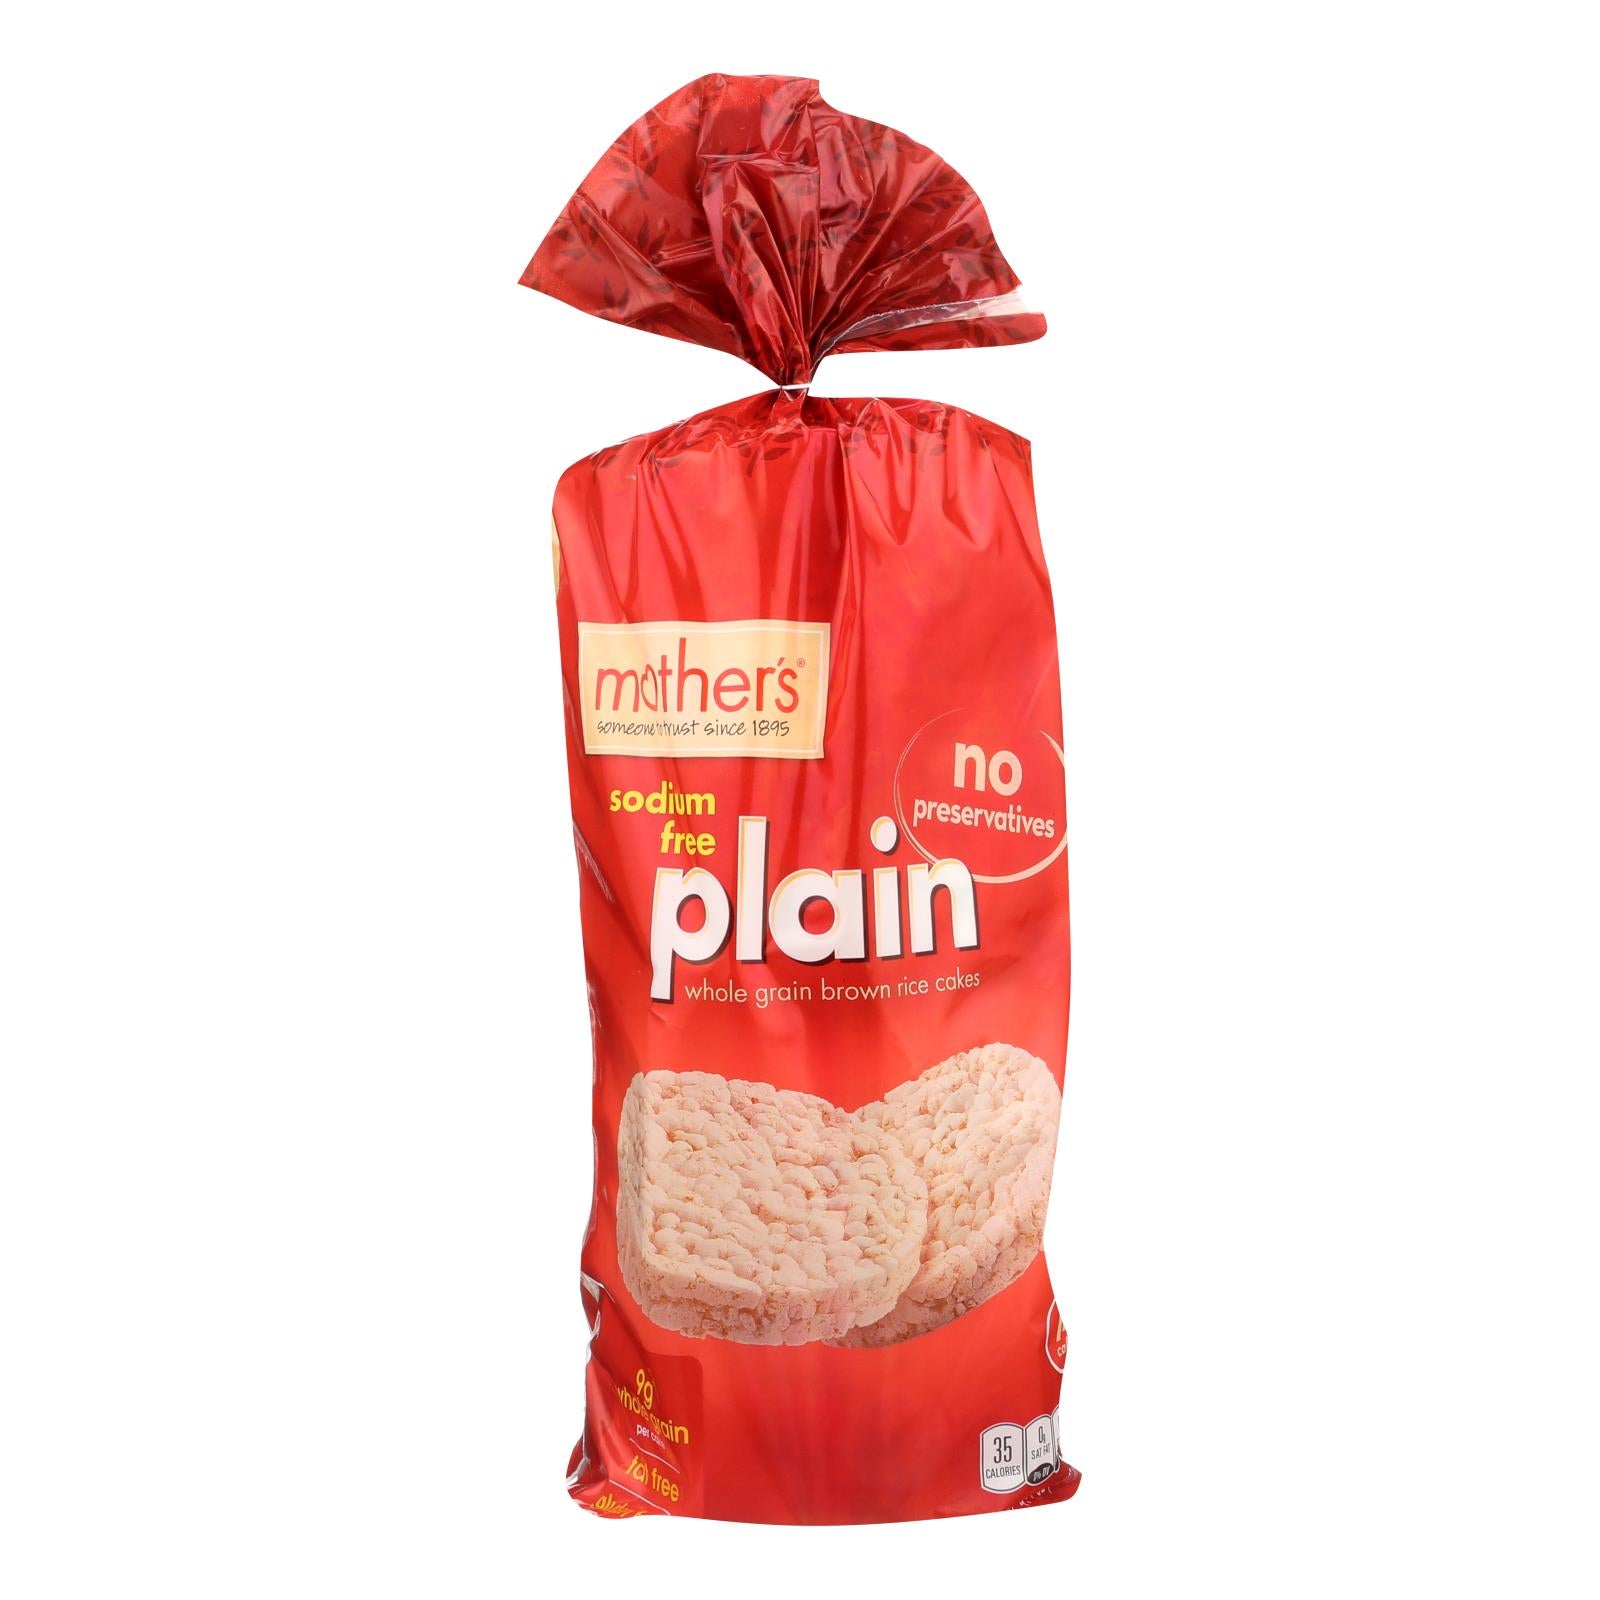 Mother's Plain Rice Cakes - Rice - Case Of 12 - 4.5 Oz.